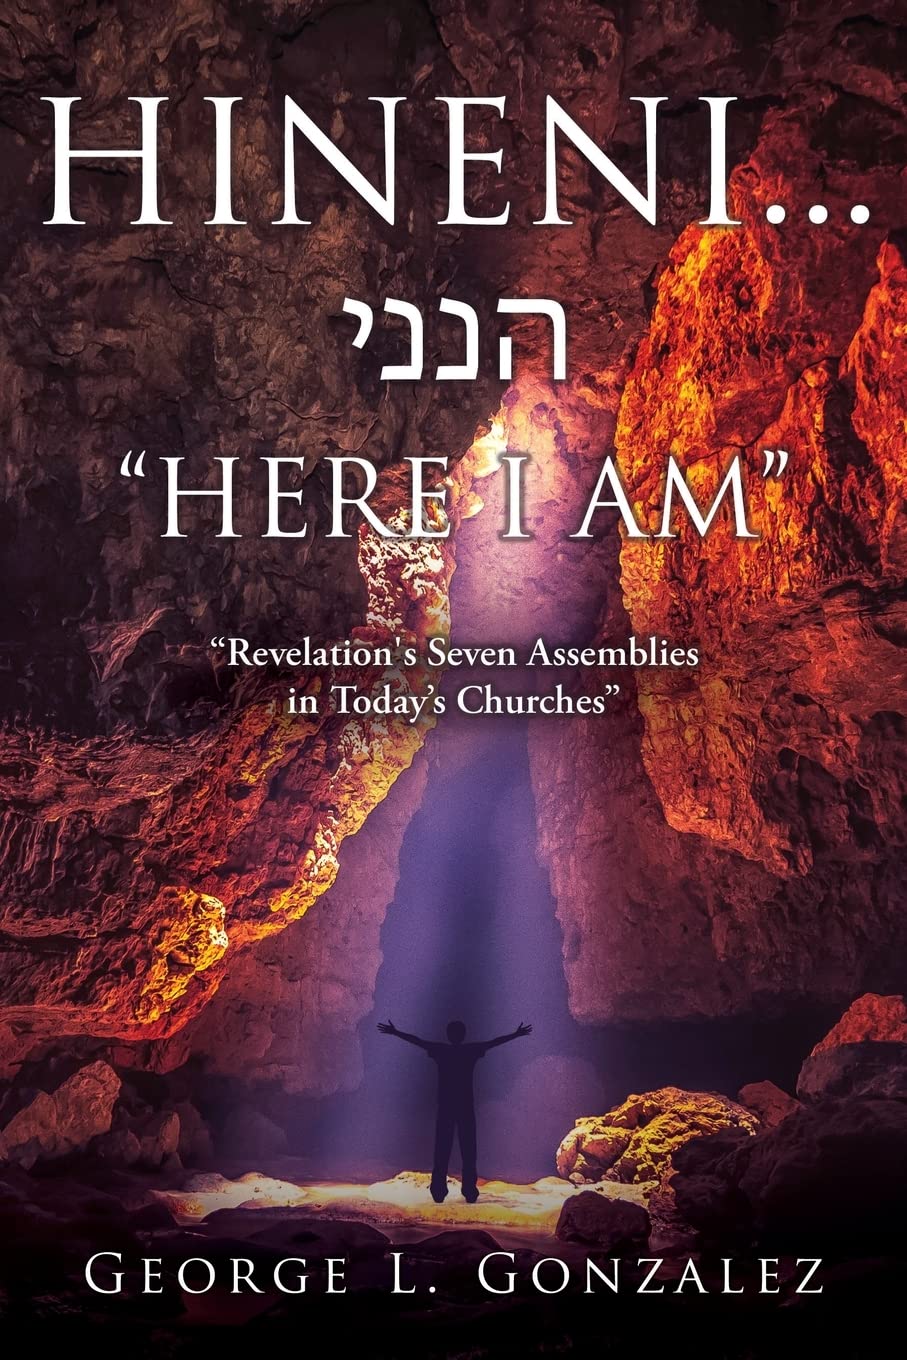 Hineni... הנני "HERE I AM": "Revelation's Seven Assemblies in Today's Churches" by George Gonzalez 